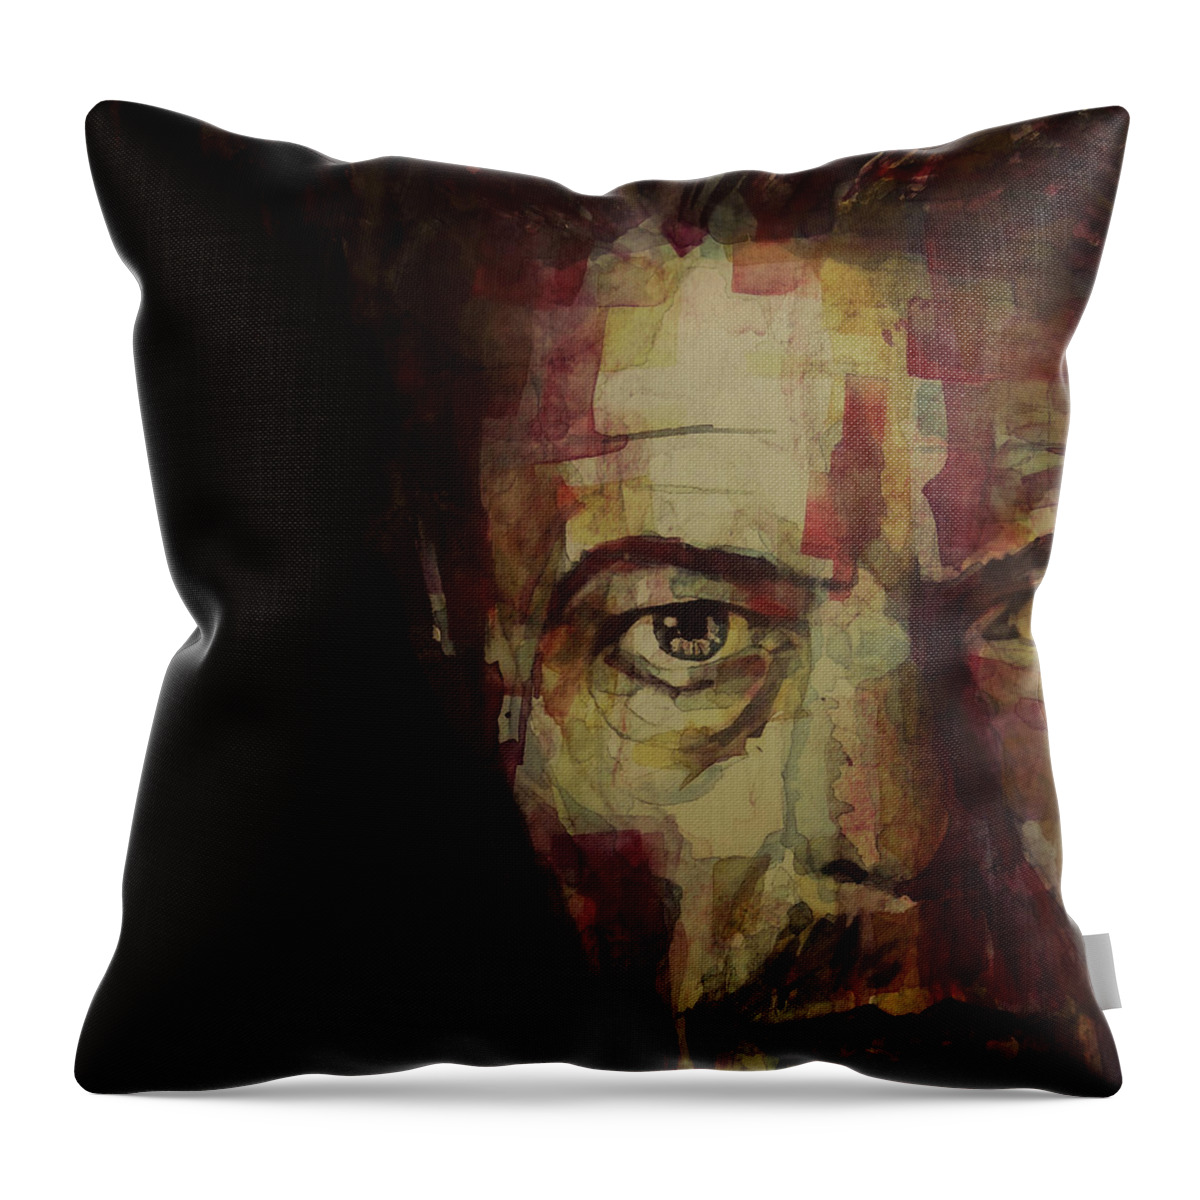 David Bowie Throw Pillow featuring the painting Watch That Man Bowie by Paul Lovering